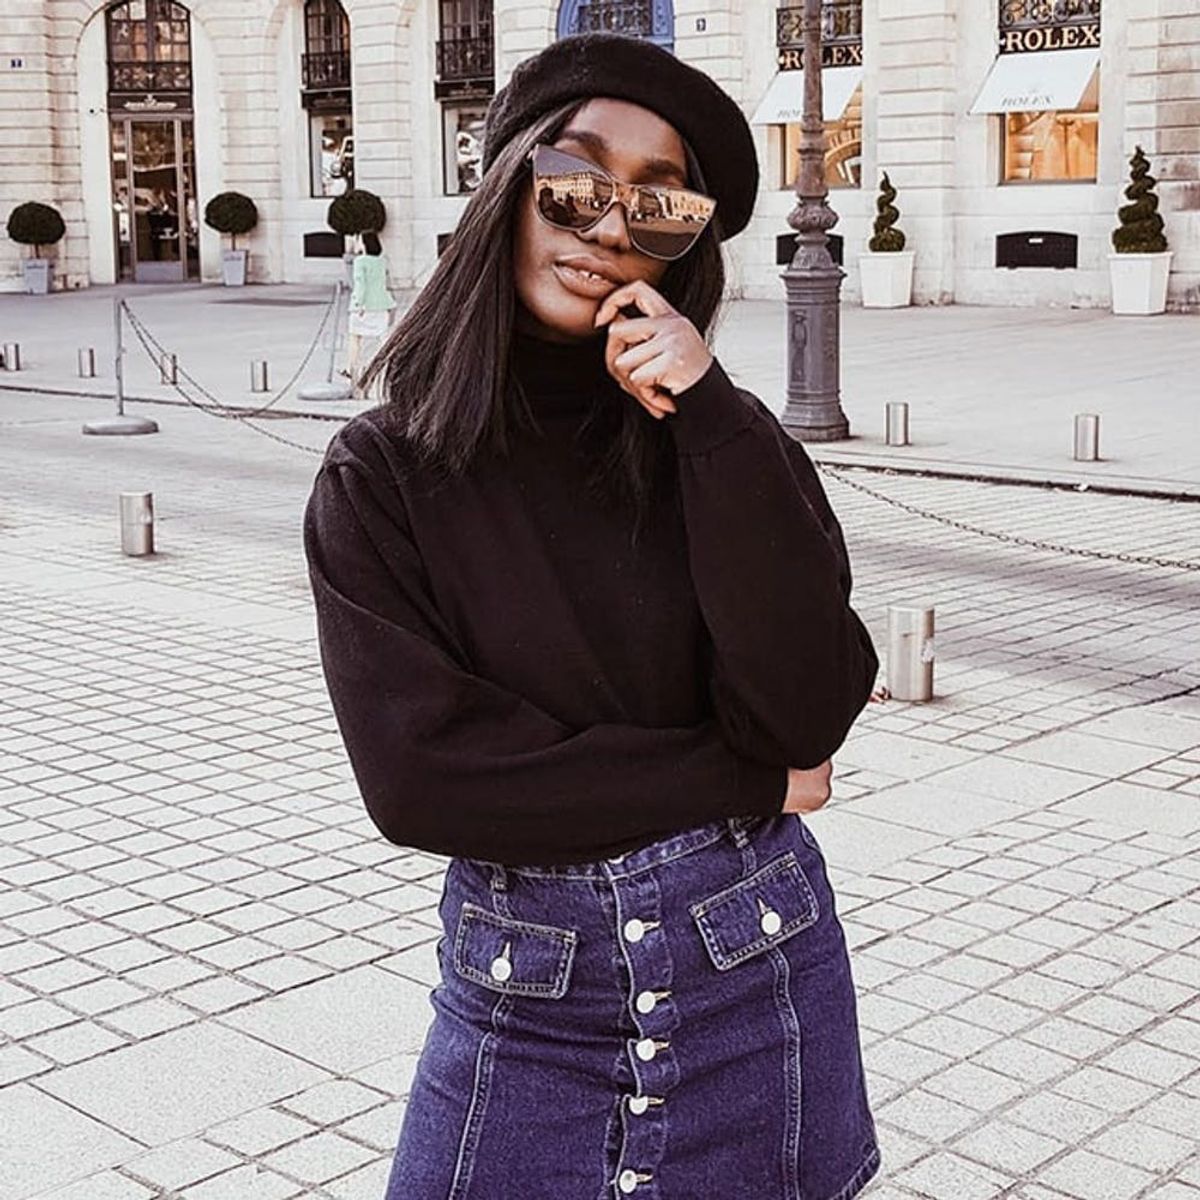 The Trends to Keep and Store in 2019, According to a French Girl